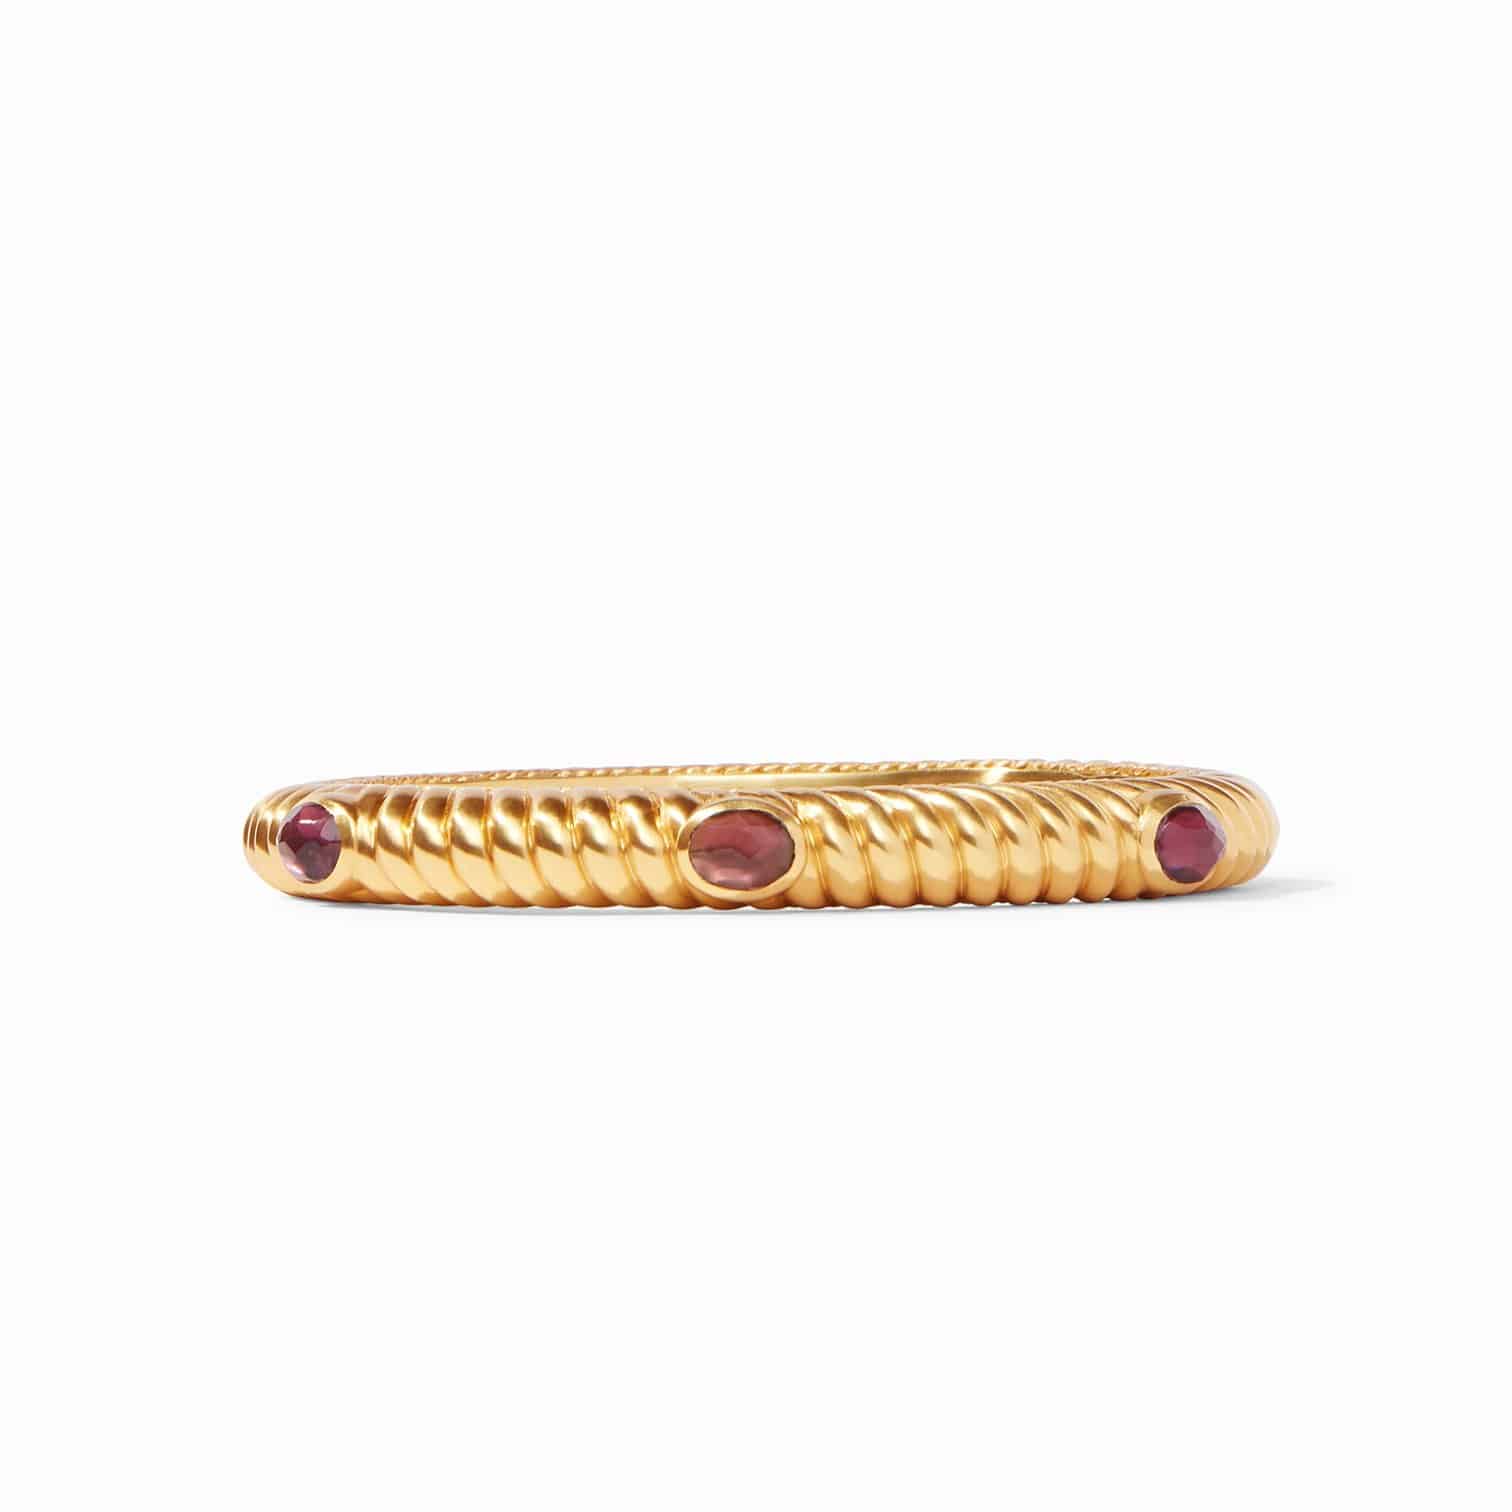 Julie Vos - Julie Vos Olympia Hinge Bangle with Iridescent Bordeaux Stones - Little Miss Muffin Children & Home